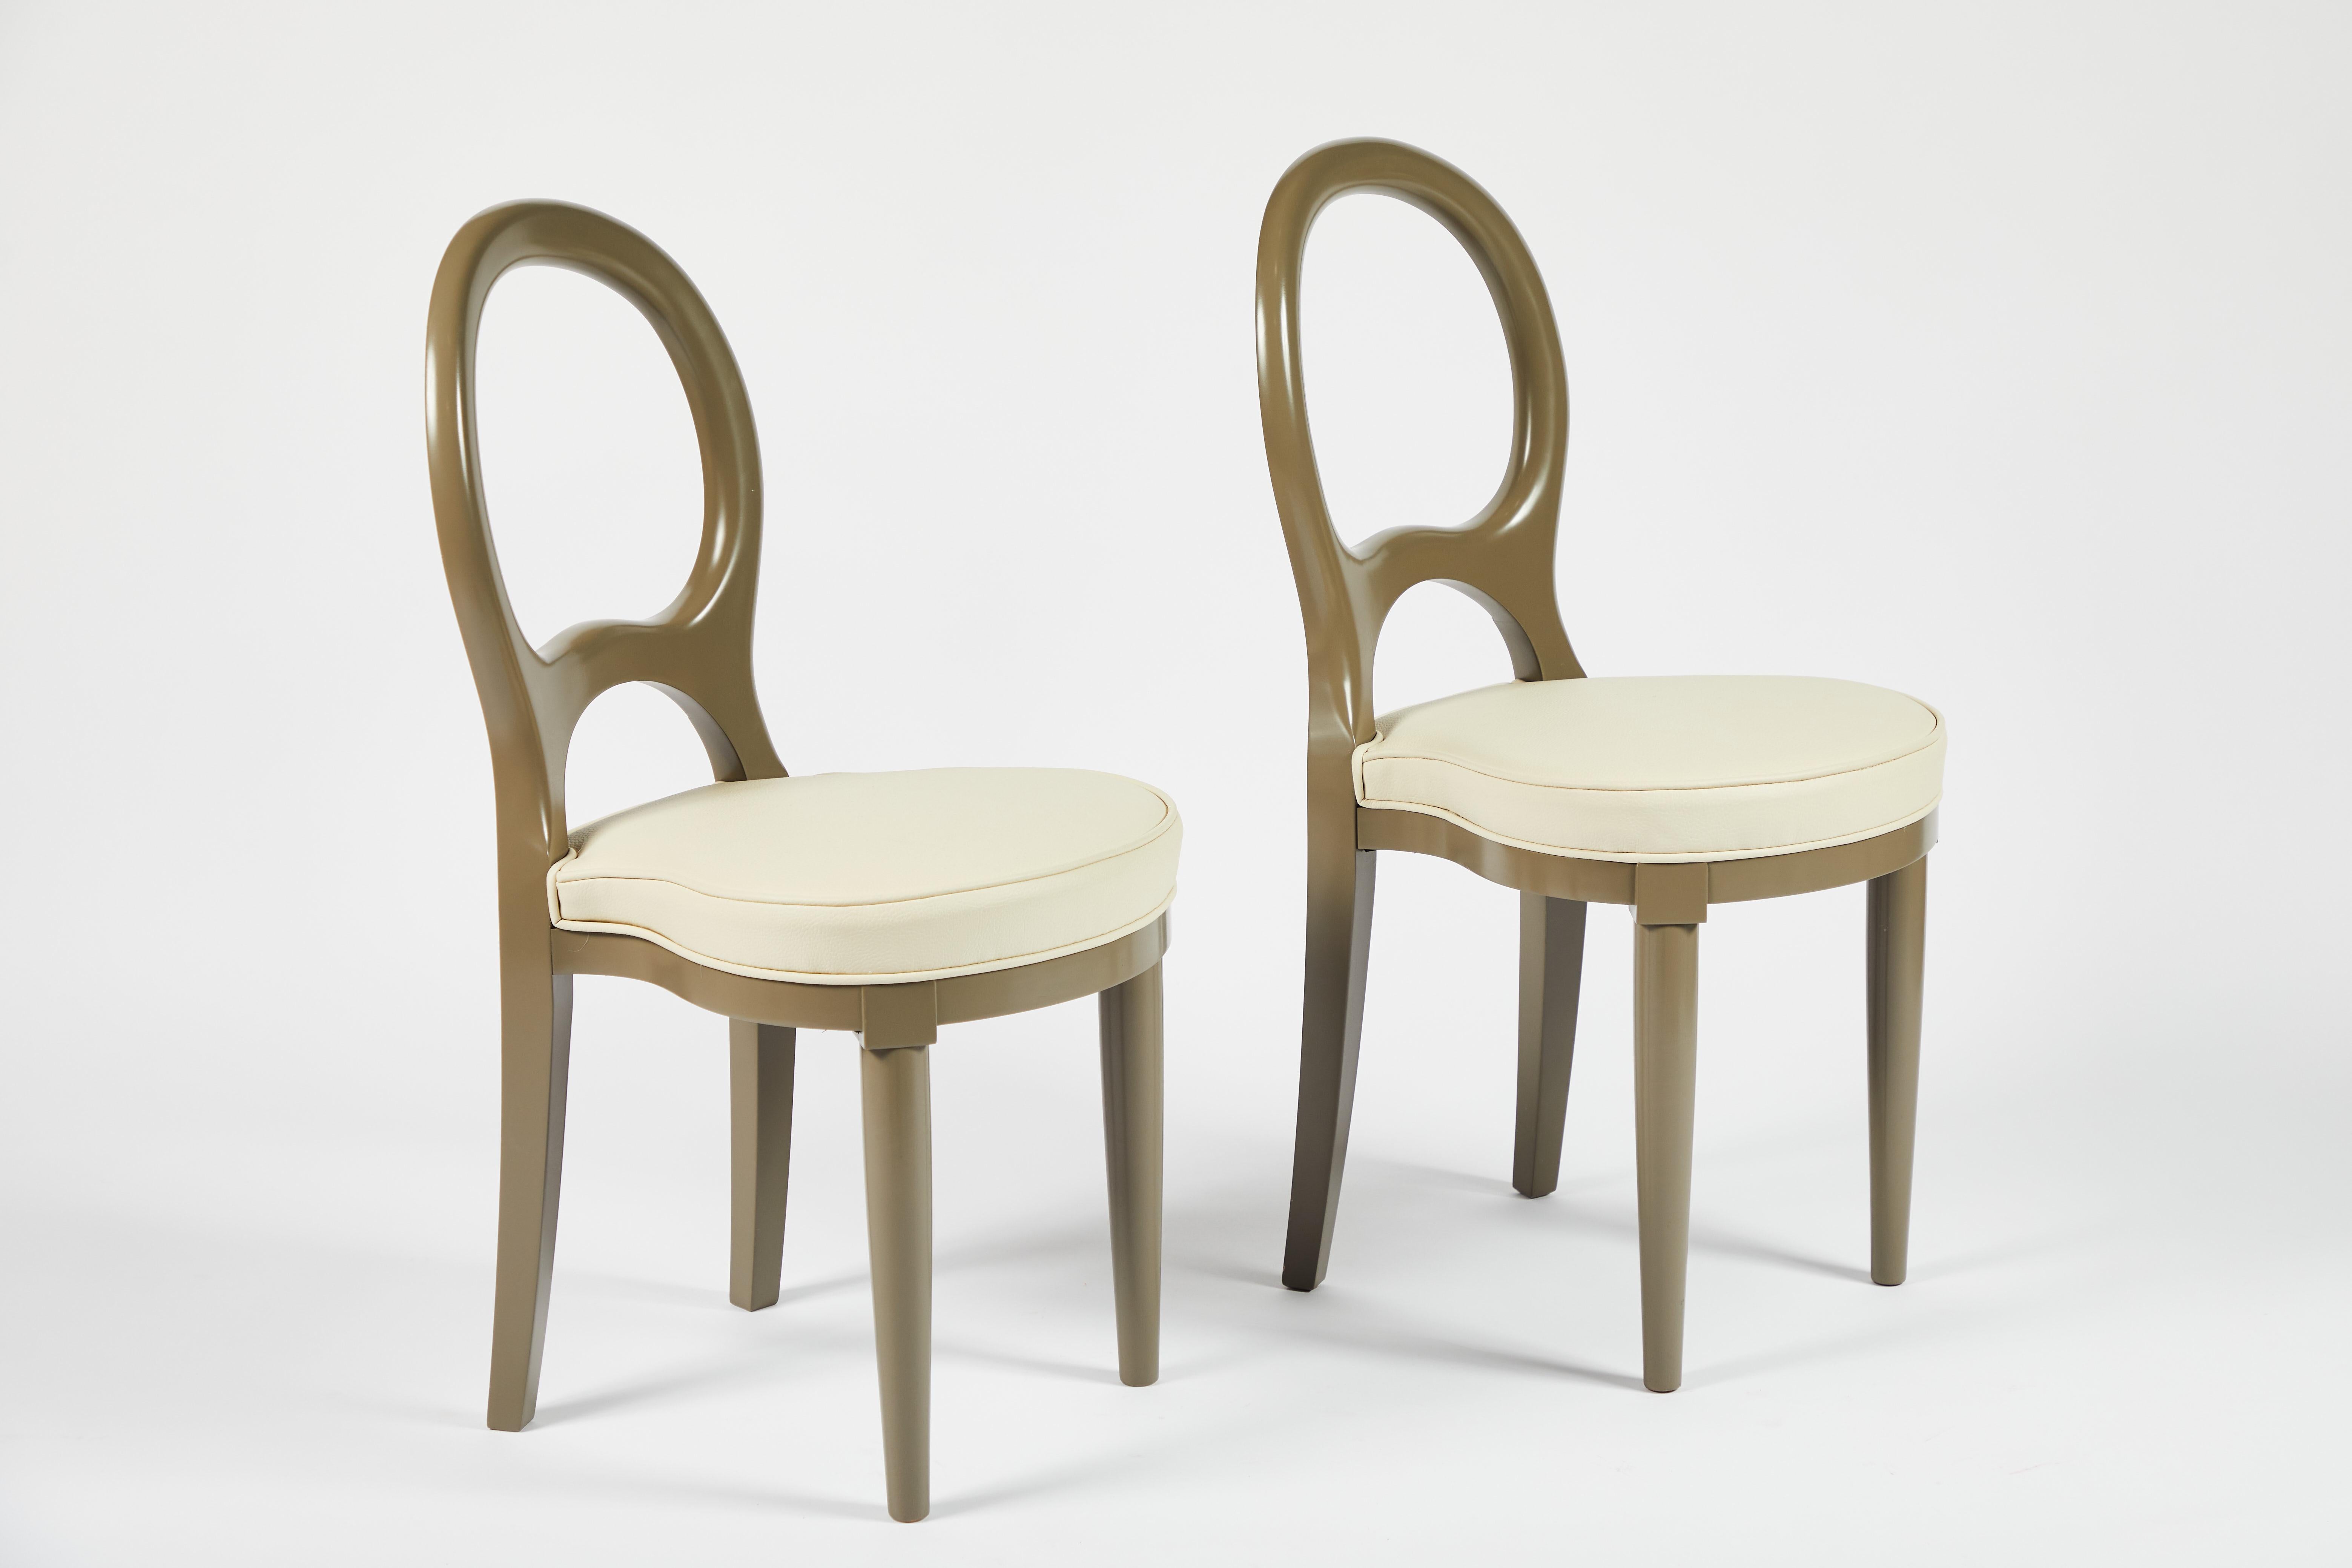 Bilou Bilou dining chairs, set of 4
Material: Beech
Finish: Taupe Lacquer
Condition: Good, minor nicks in paint.

   